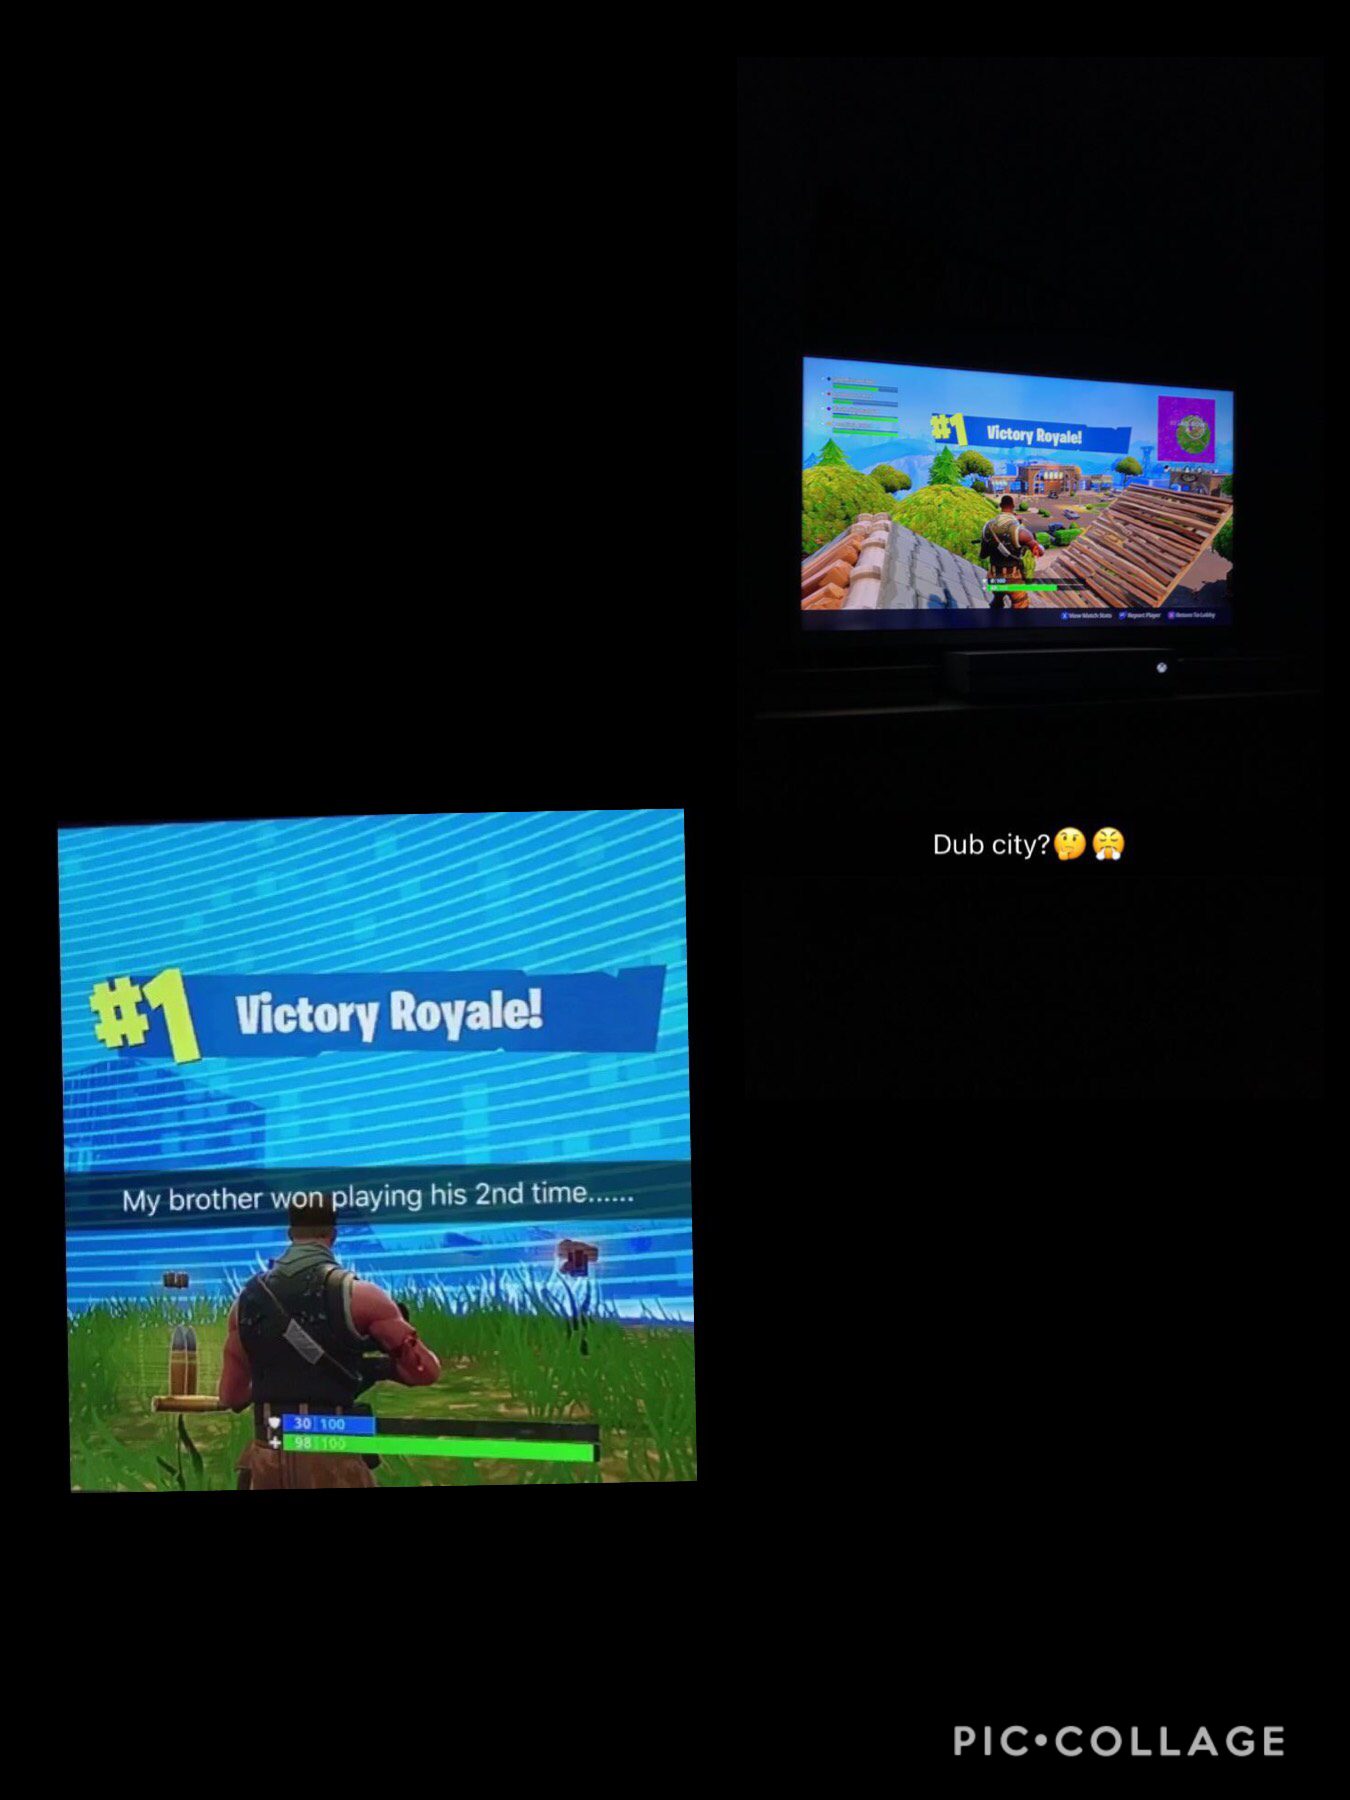 Idc if you don’t like fortnite cause... it’s pretty dang awesome...💀